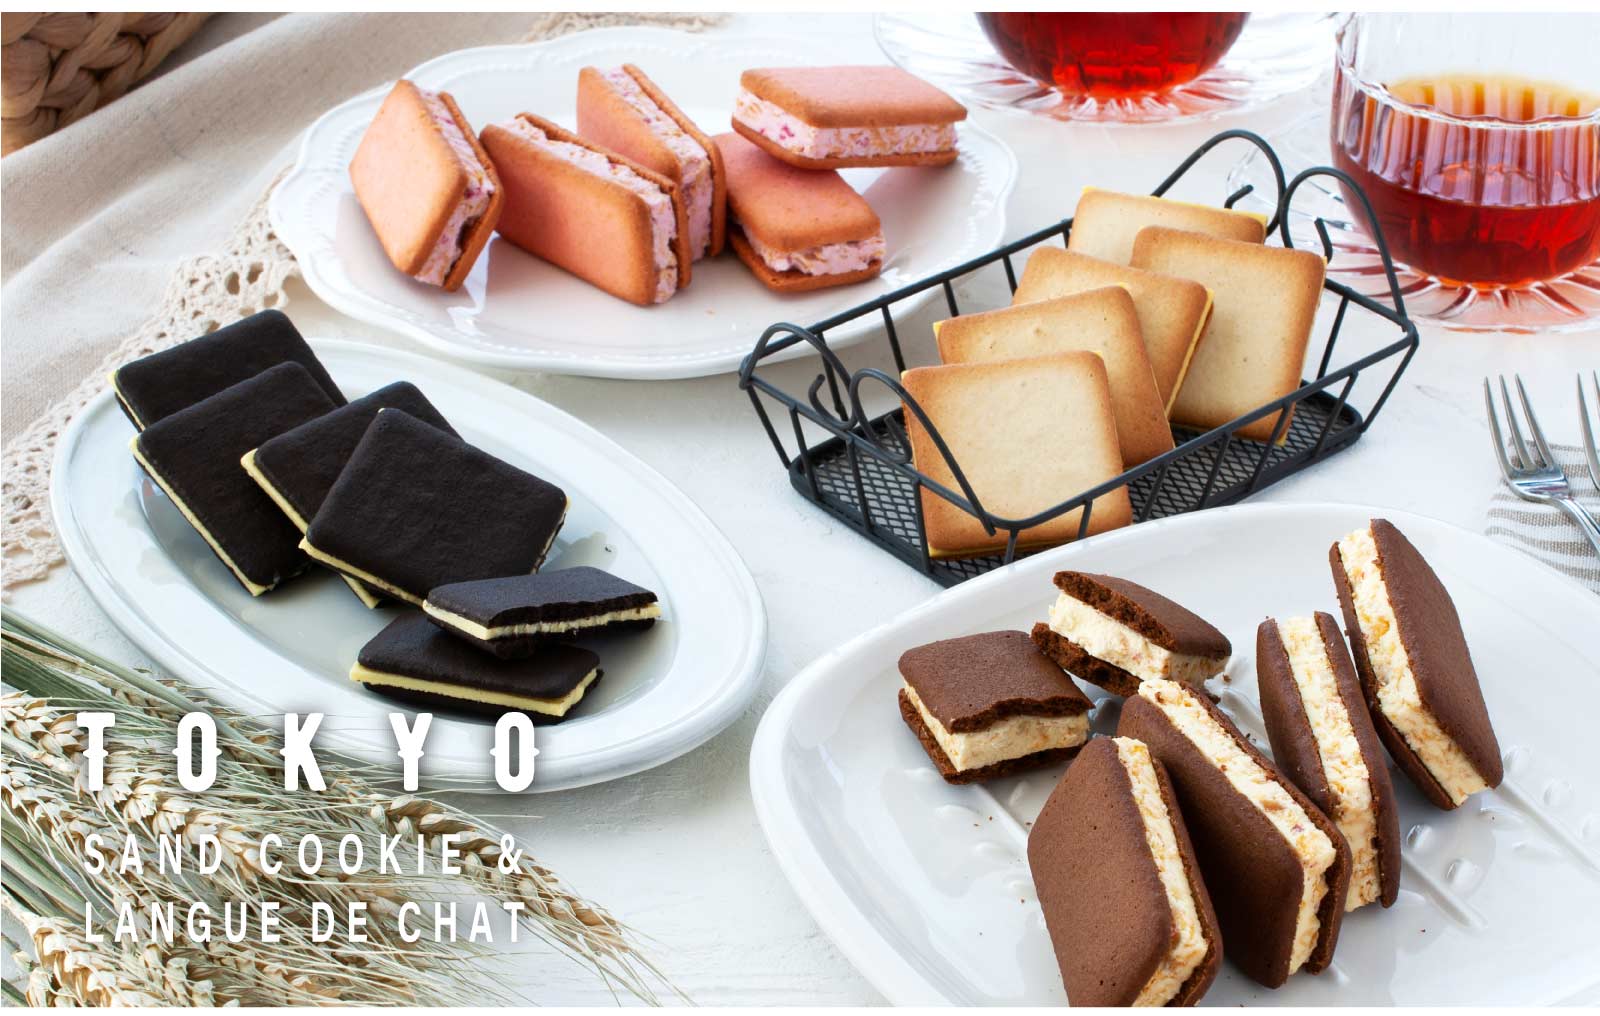 tokyo baked base sandwich cookies and langue de chat, best luxury japanese desserts, luxury Japanese desserts, best Japanese snacks, exotic japanese snacks, hard to find japanese snacks, hard to find japanese snacks online, exotic japanese snacks online, exotic japanese snacks worldwide, langue de chat online, sandwich cookie online